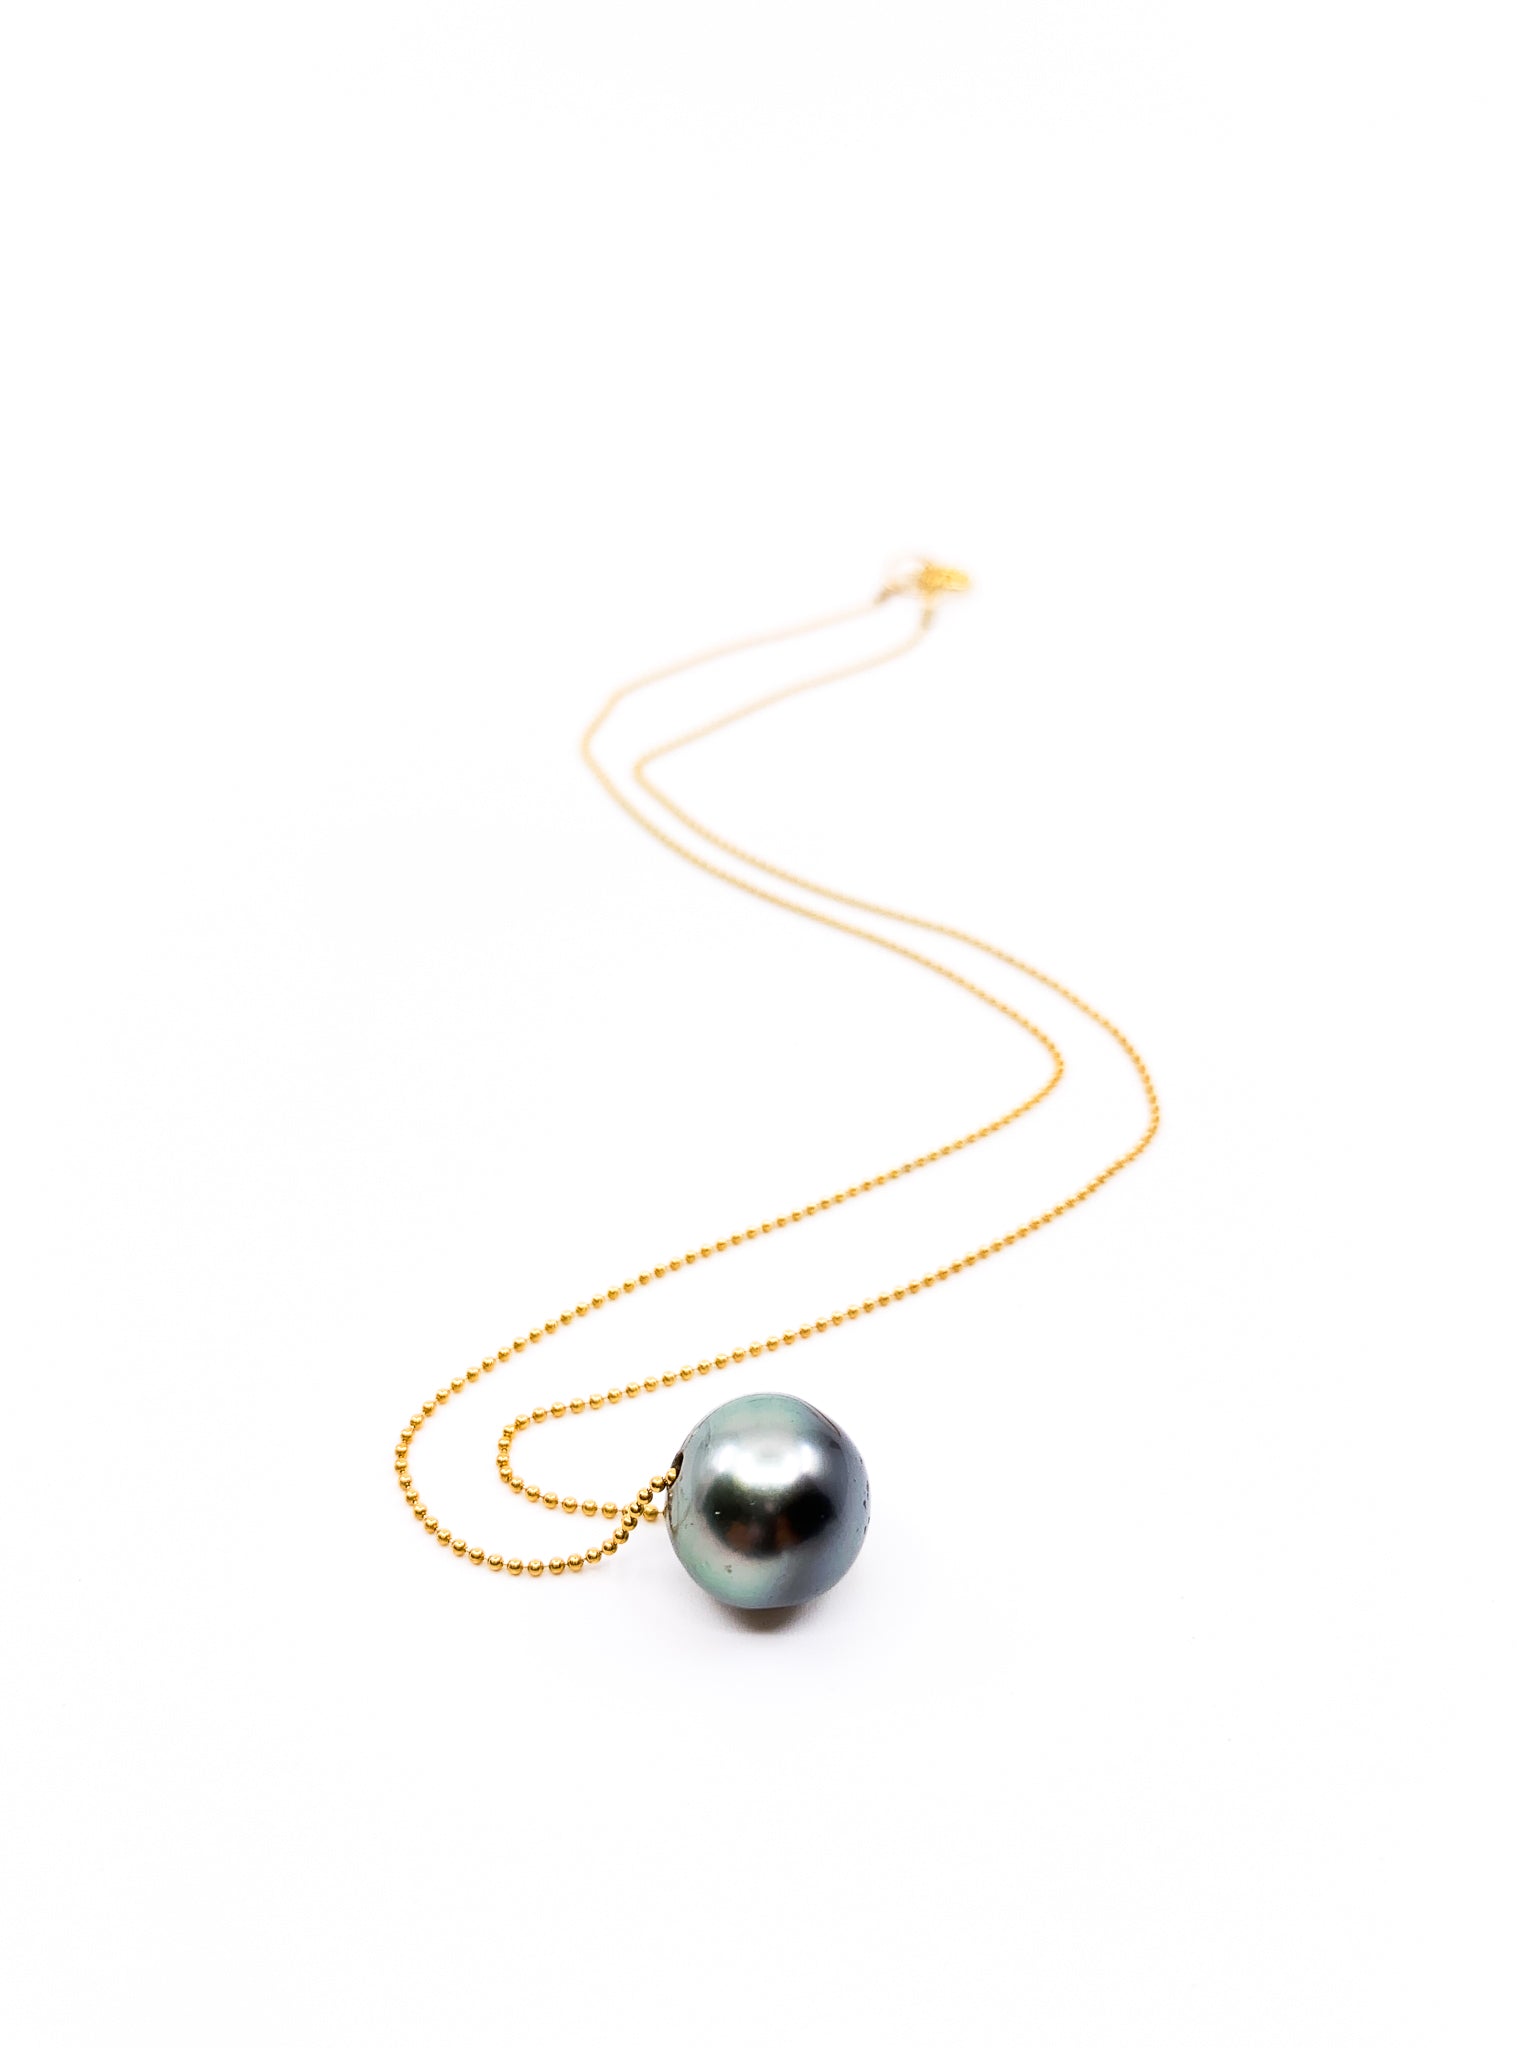 Tahitian pearl with delicate gold chain necklace by eve black jewelry made in Hawaii